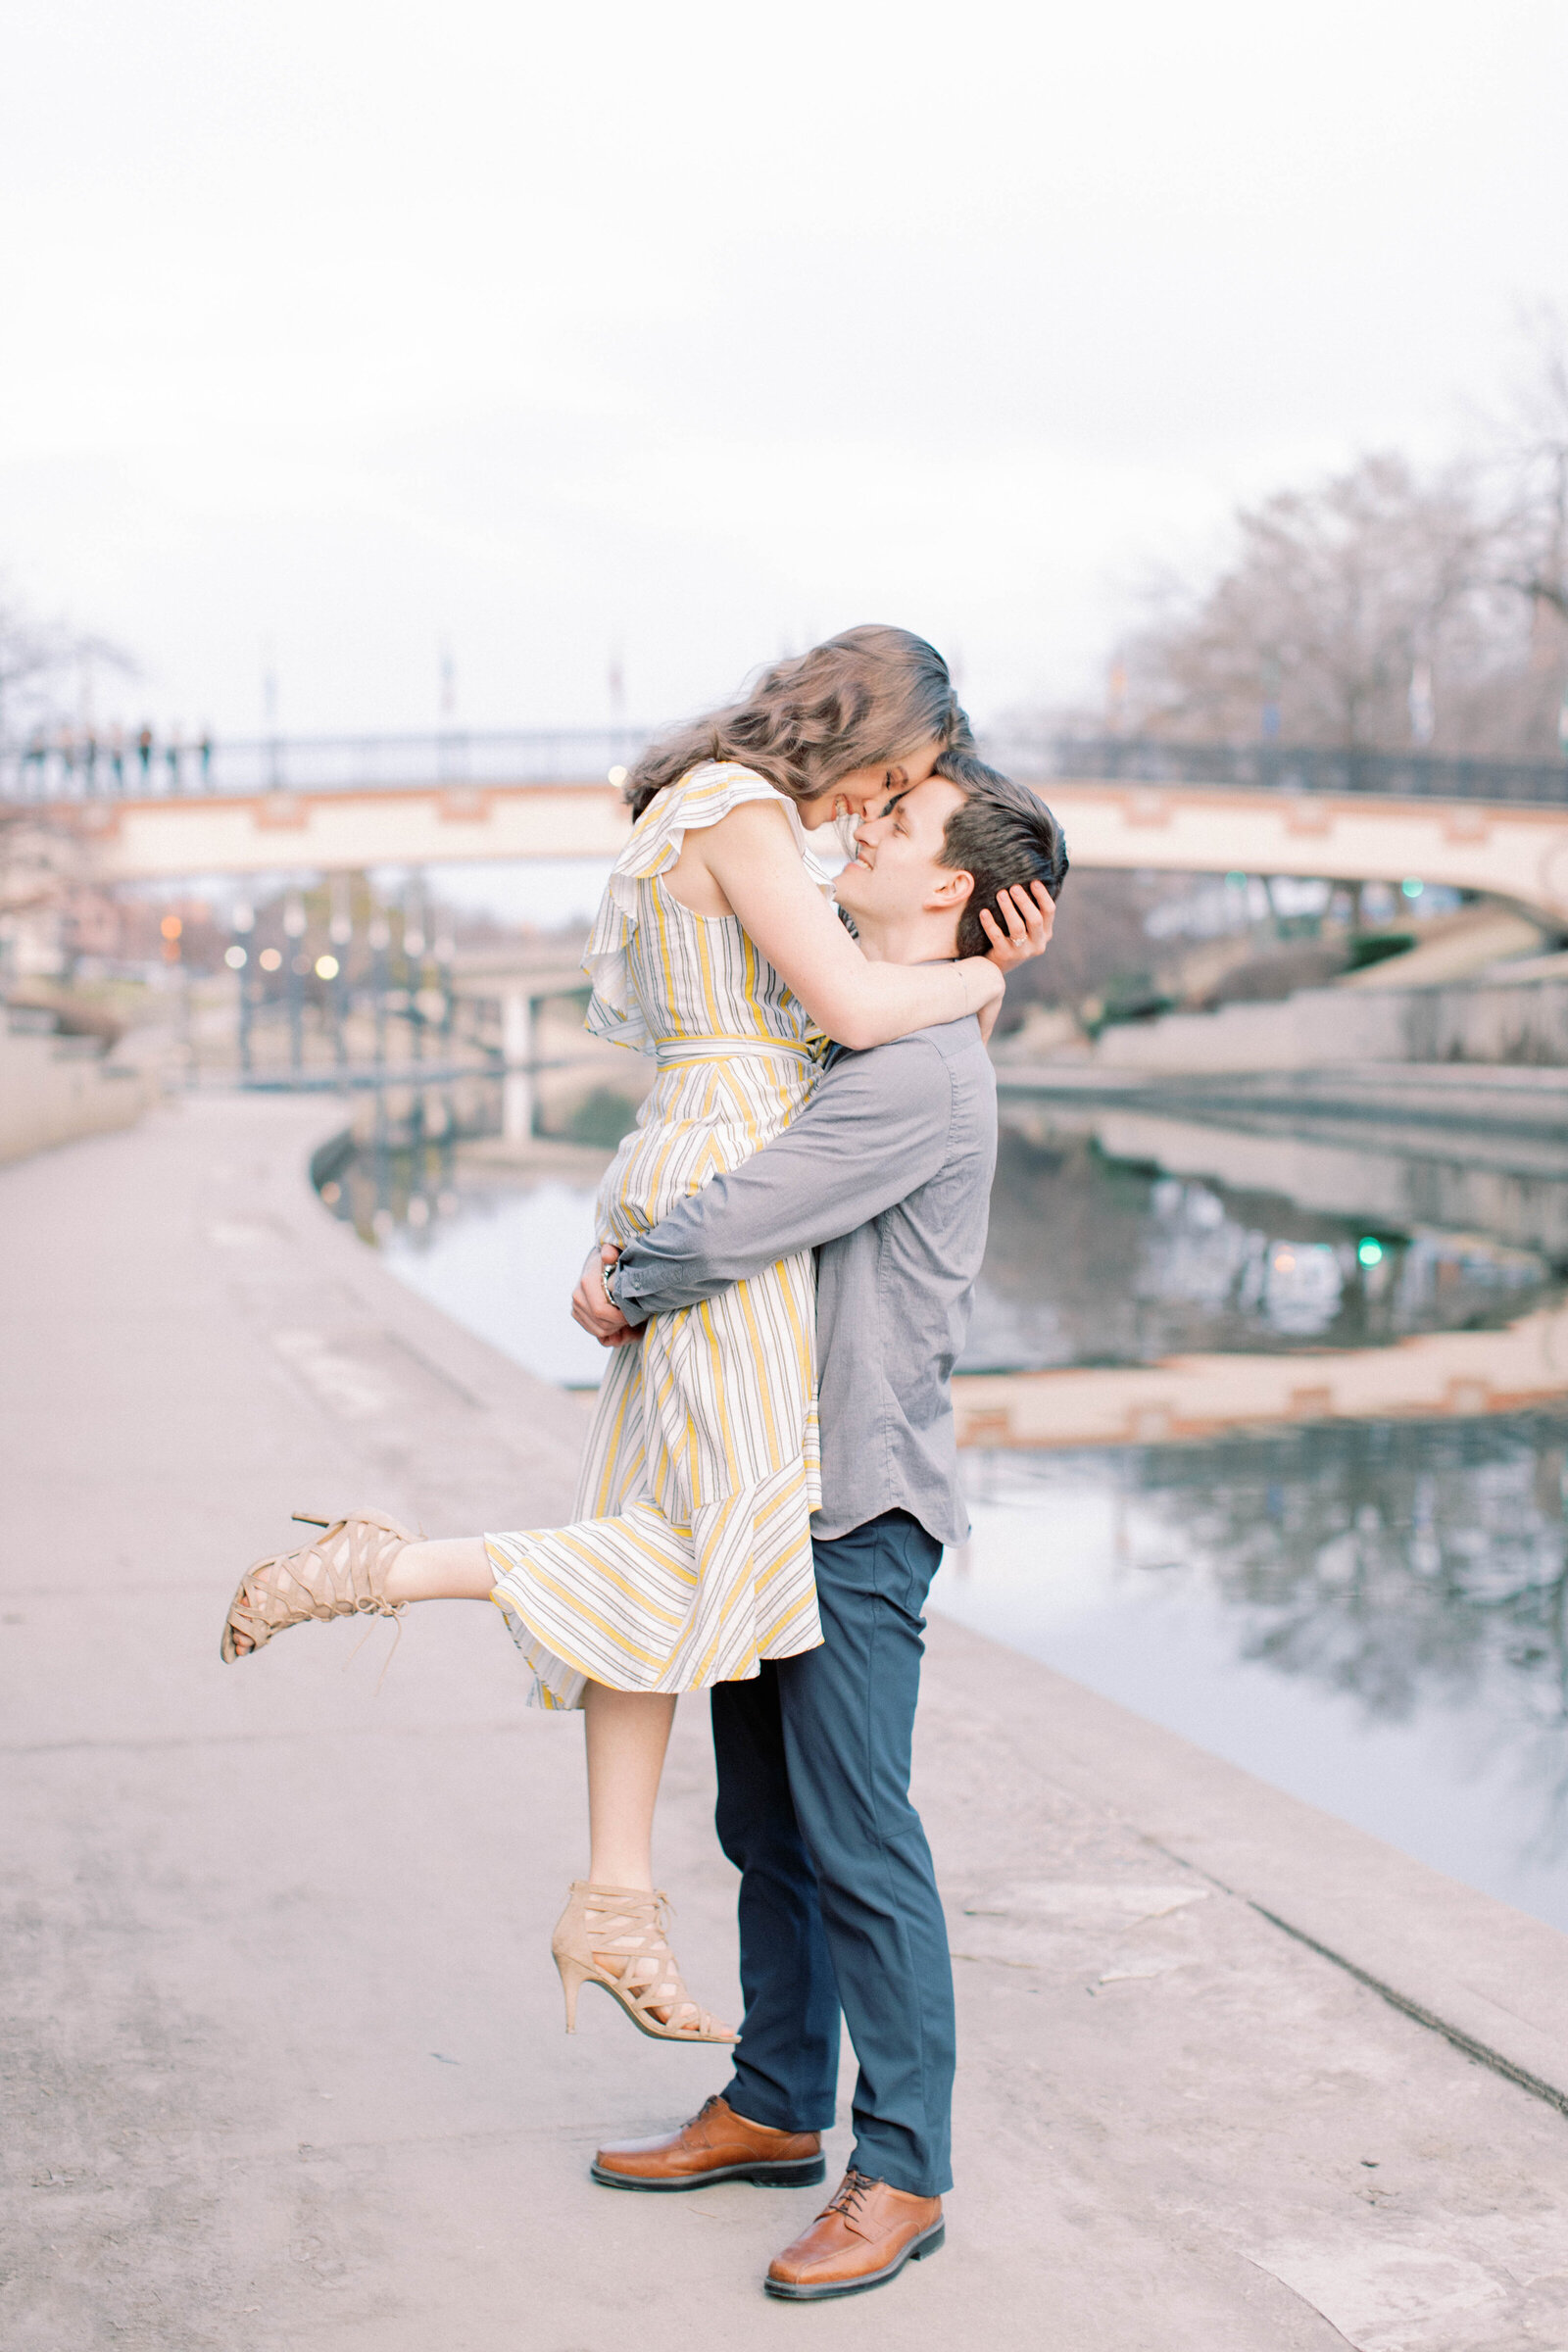 Engagement session at the Plaza in Kansas City